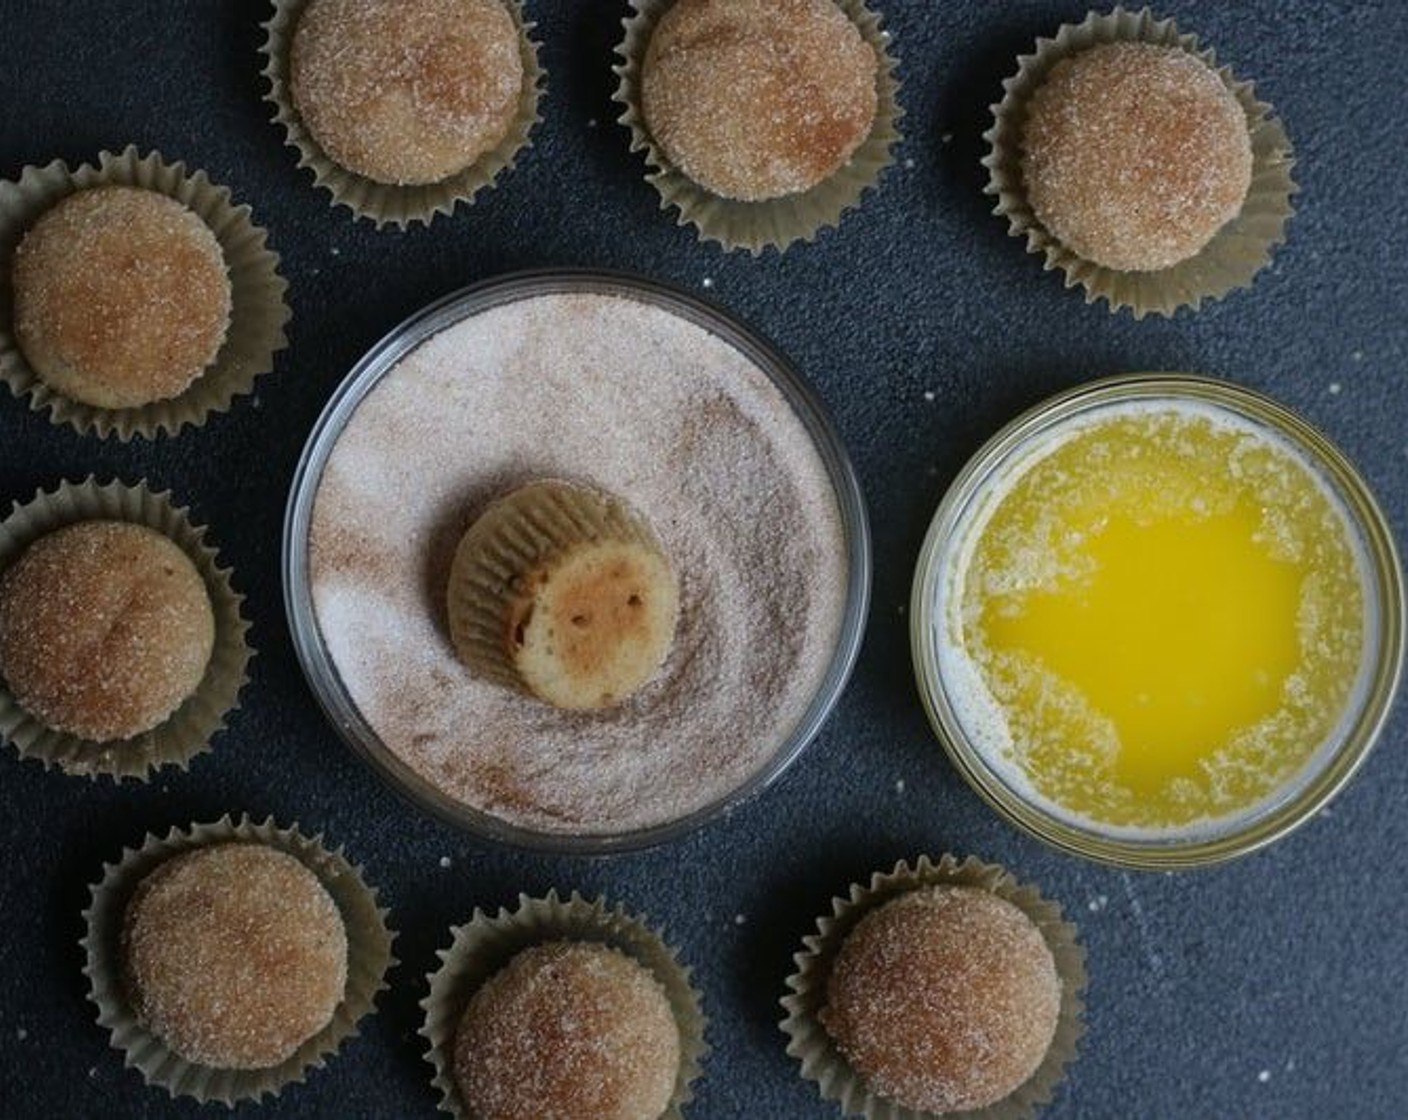 step 9 In a separate bowl, stir together the Ground Cinnamon (1/2 tsp) and Granulated Sugar (1/2 cup) until well combined. Dip each mini-muffin upside down into the Butter (1/4 cup), coating the top evenly. Immediately dip and roll in the cinnamon sugar mixture.